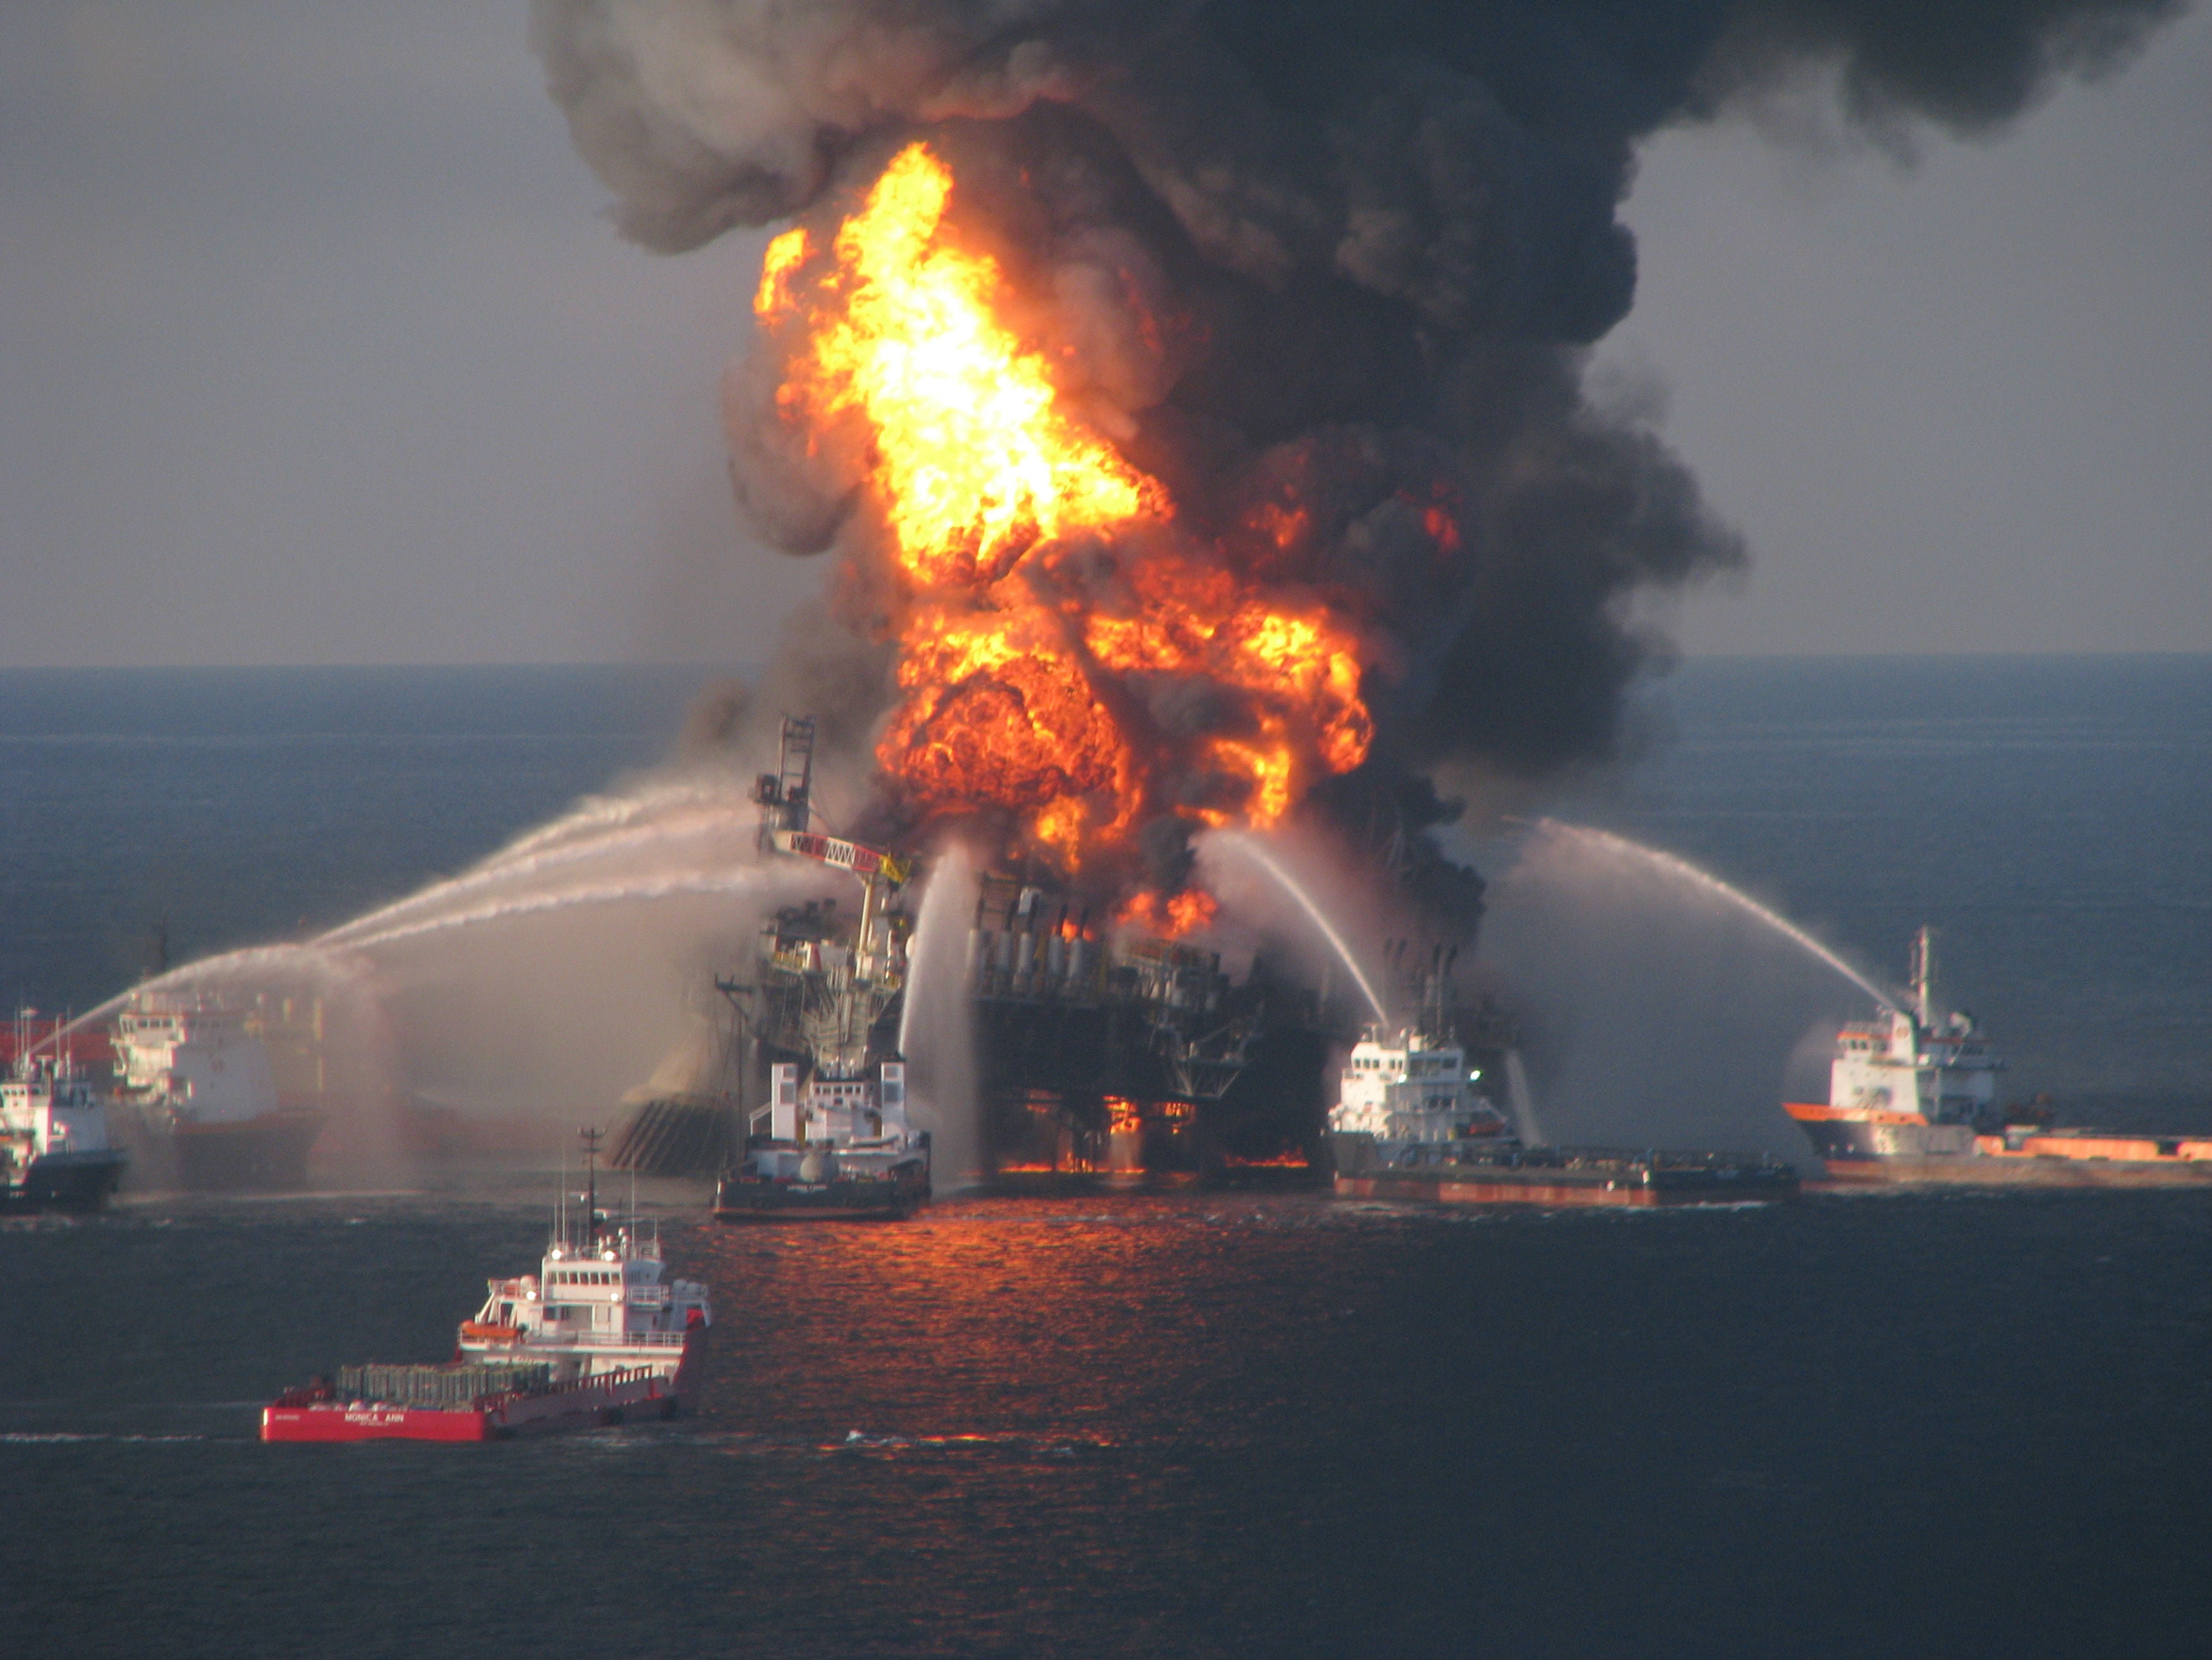 BP has agreed to pay more than $20bn in settlement for the 2010 Deepwater Horizon spill